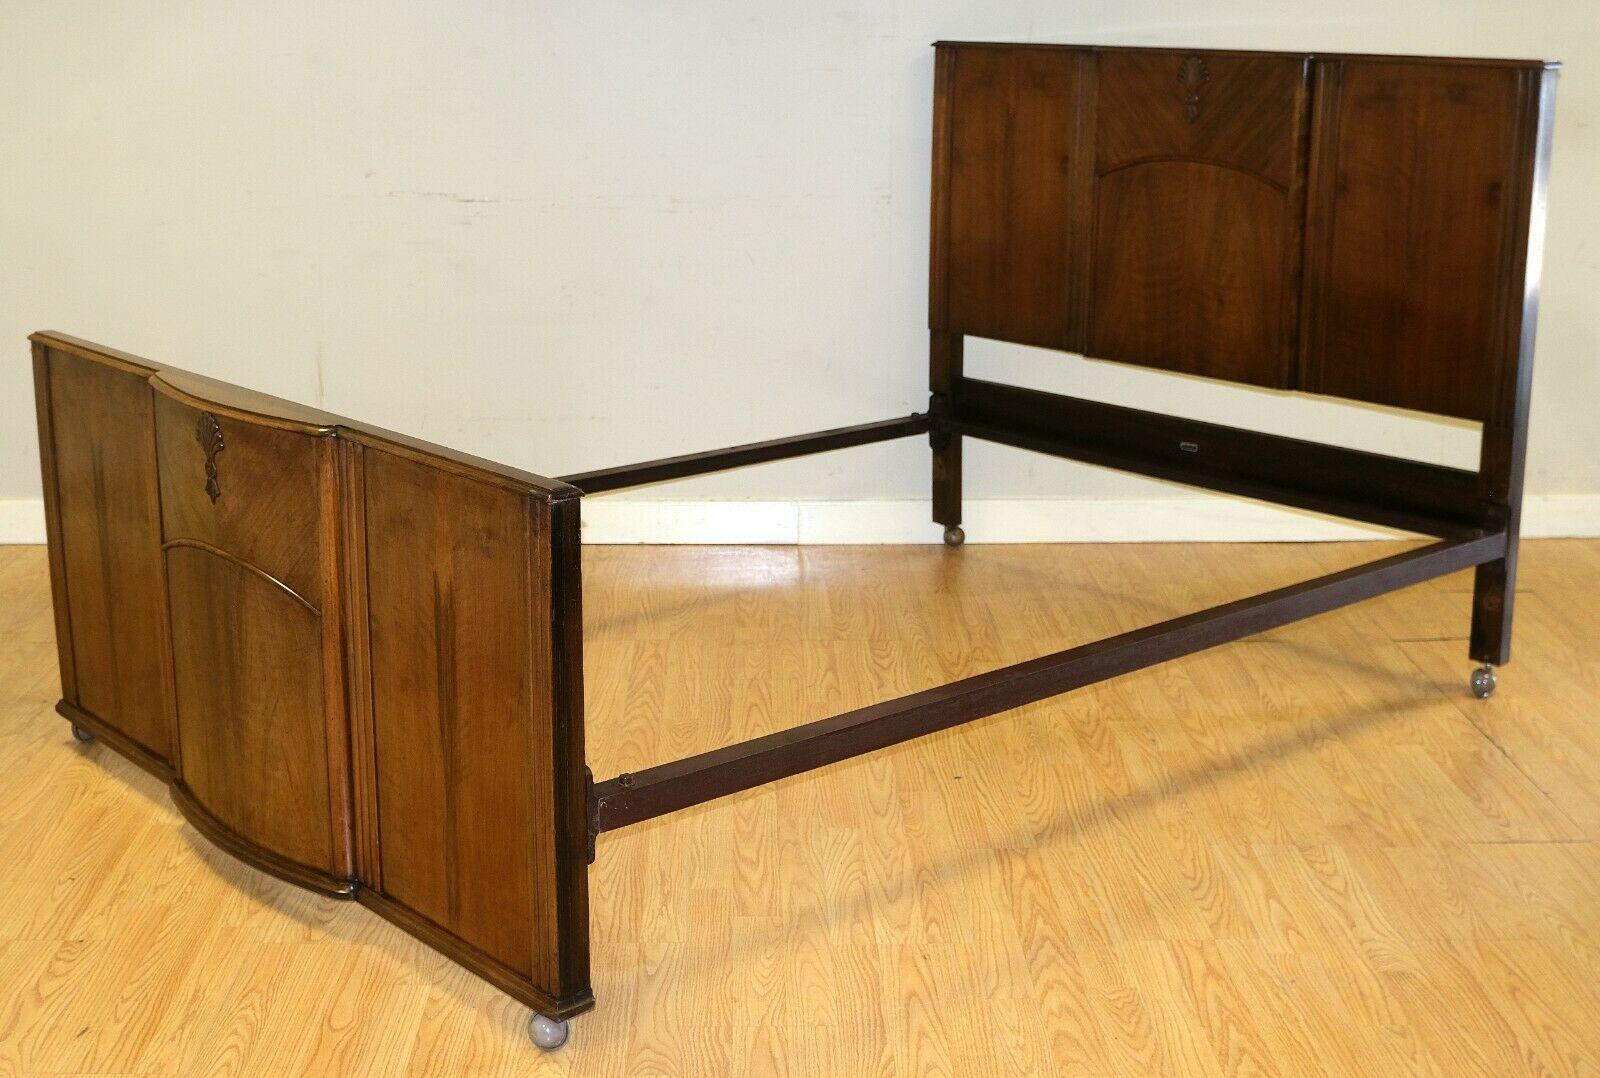 We are delighted to offer for sale this gorgeous C.W.S Cabinet Works Birmingham walnut double bed frame on wheels.

This piece is a part of a suite, which includes a ladies' wardrobe, dressing table and double wardrobe. This bed frame is well